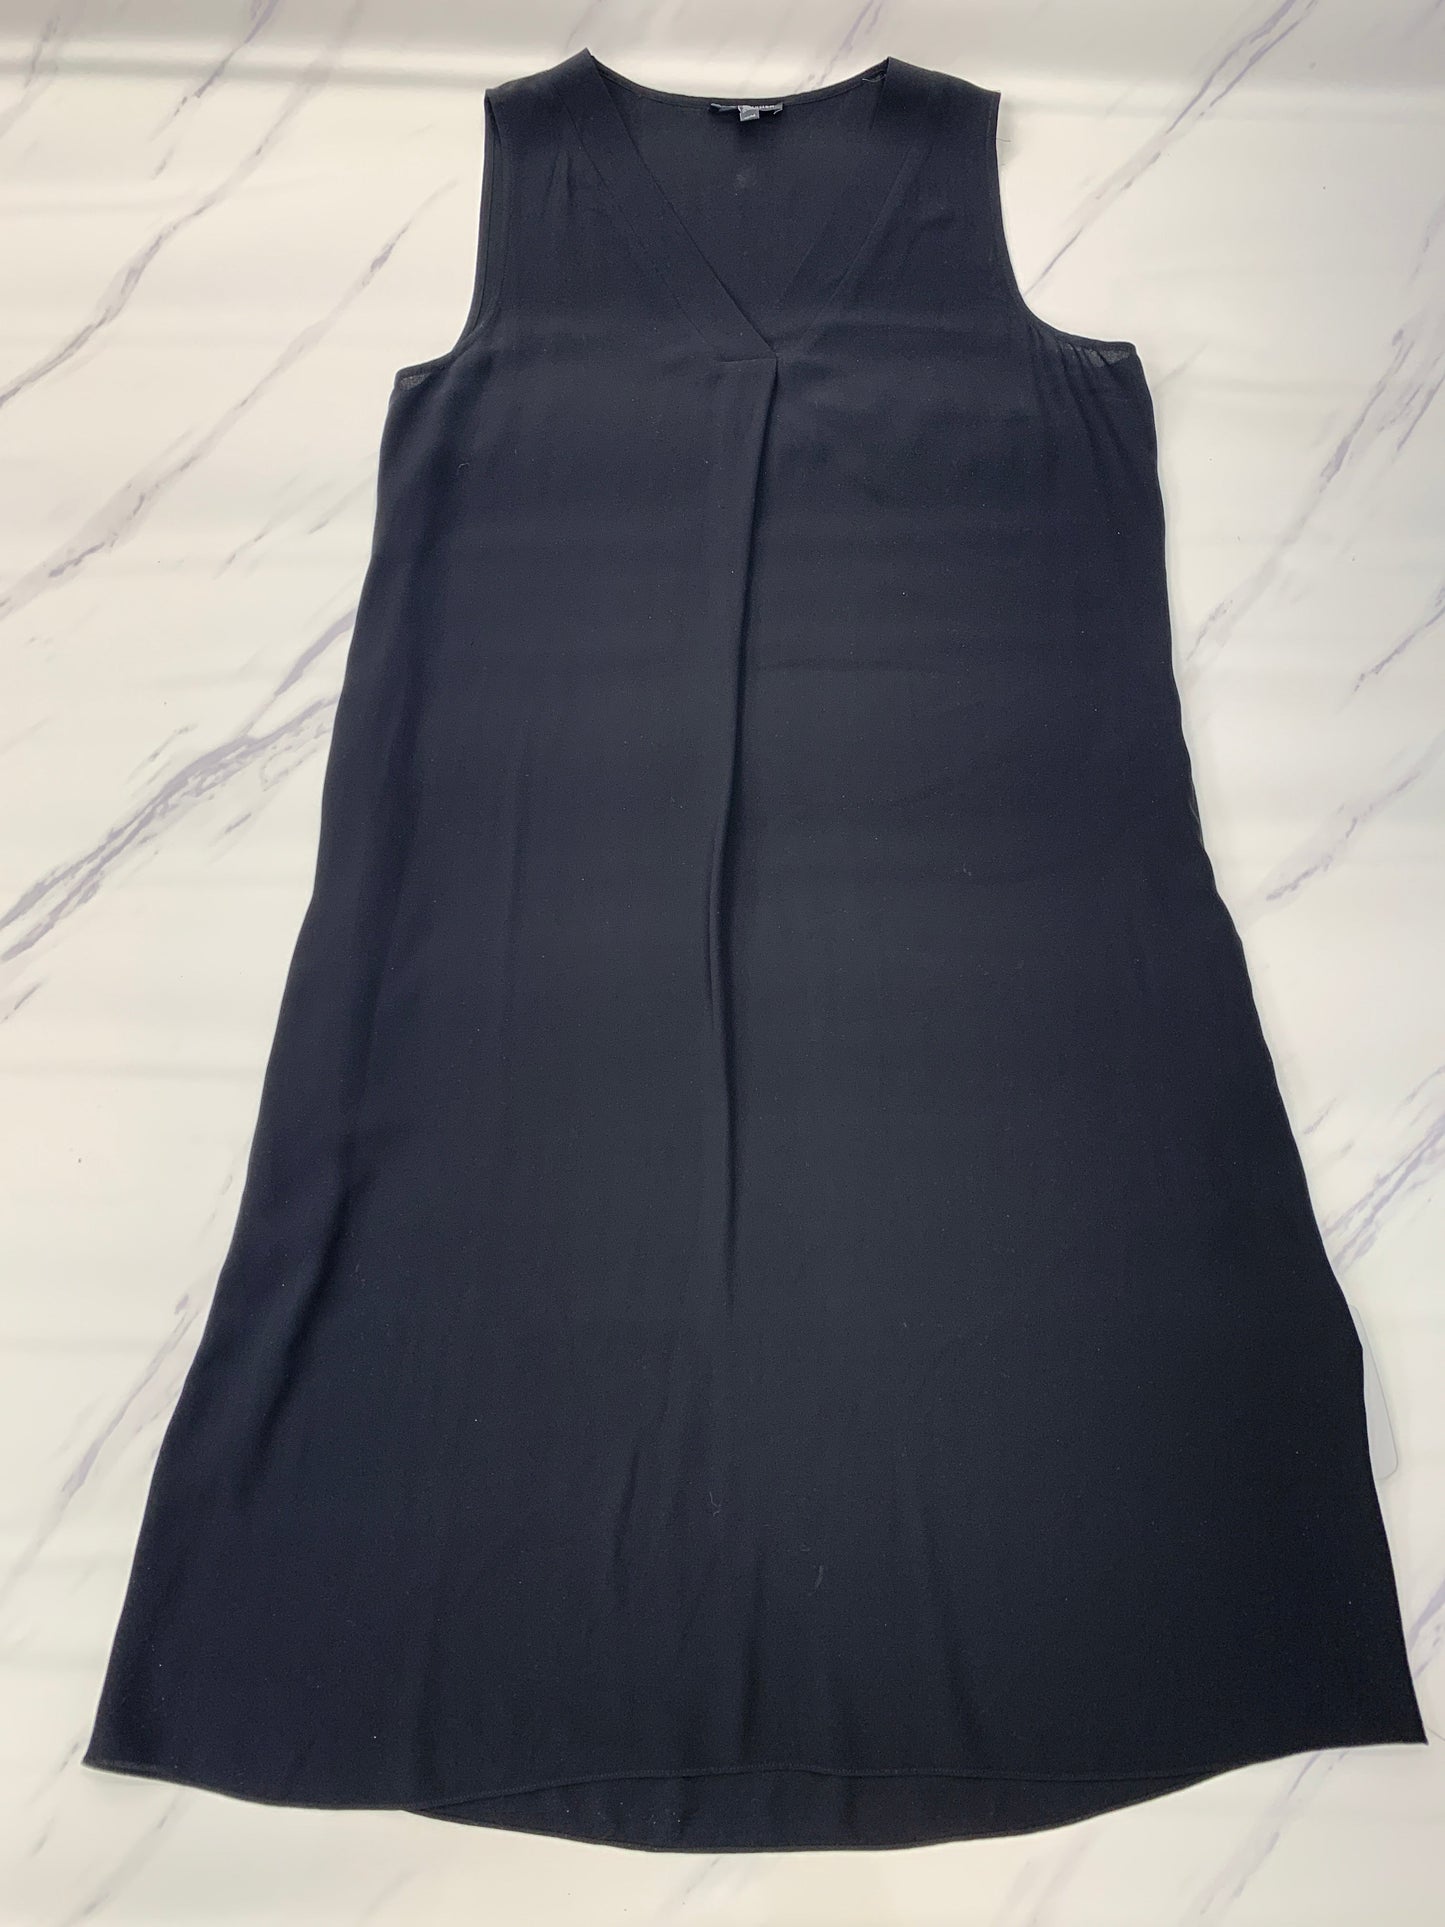 Black Dress Casual Maxi Eileen Fisher, Size M